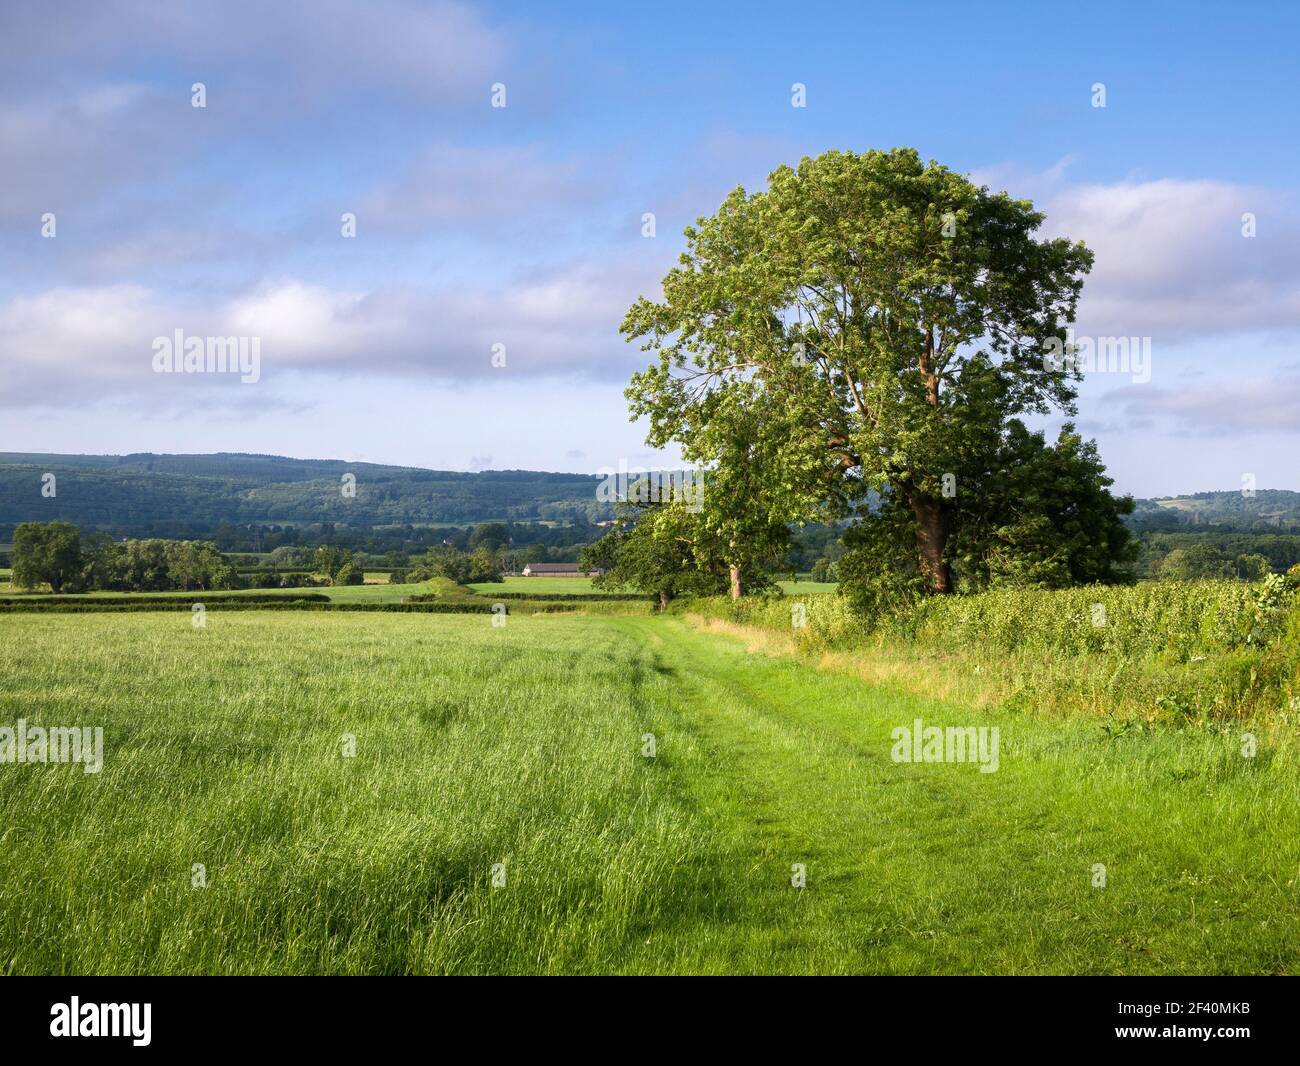 A European Ash tree growing at the side of a field Wrington Vale with the Mendip Hills beyond, North Somerset, England. Stock Photo